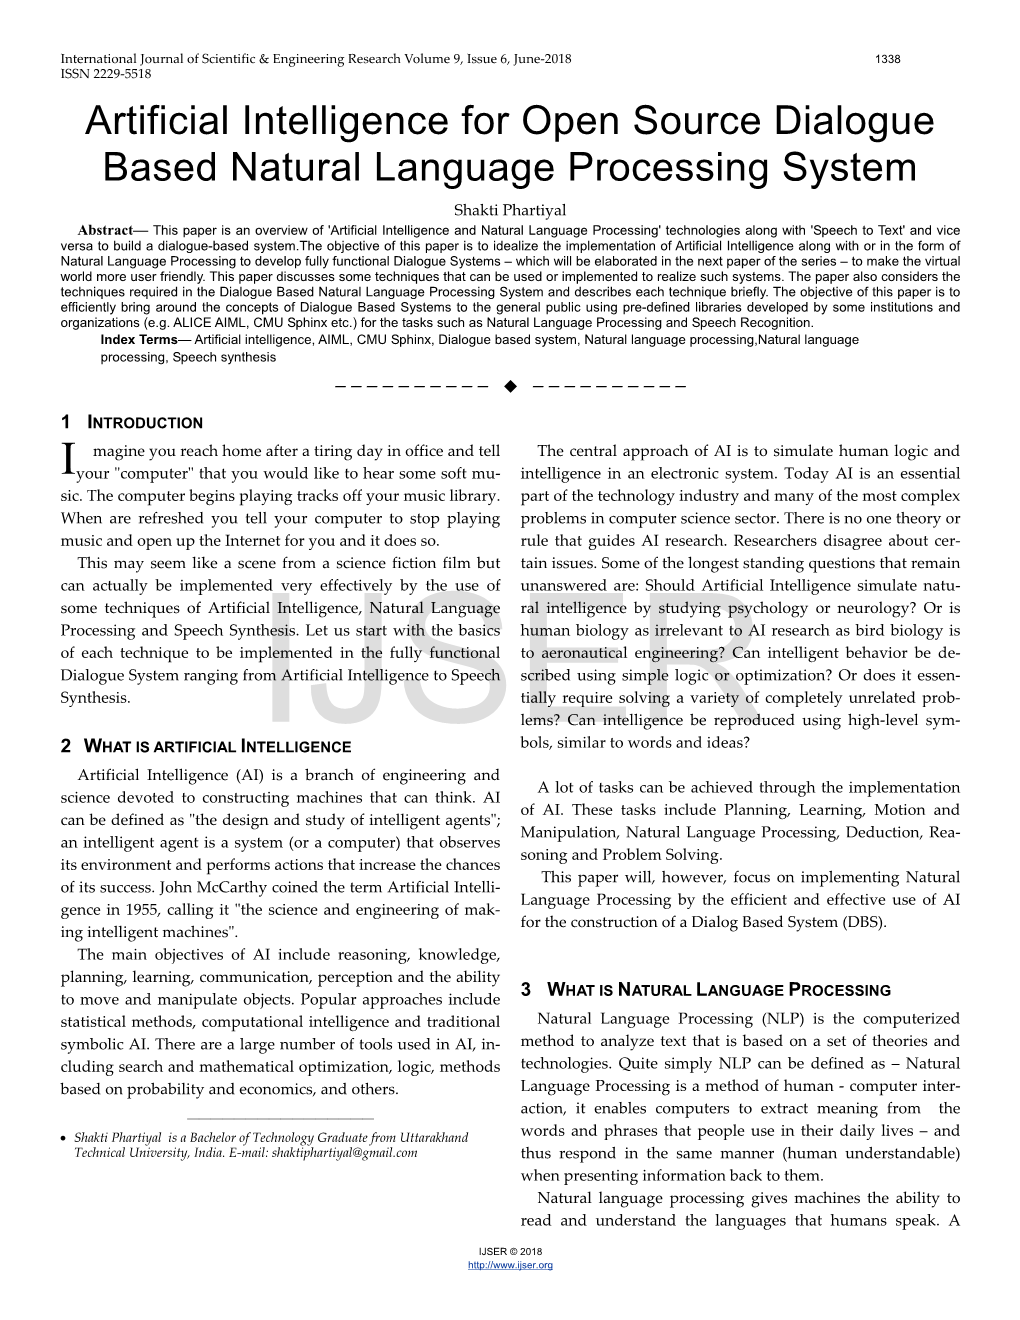 Artificial Intelligence for Open Source Dialogue Based Natural Language Processing System